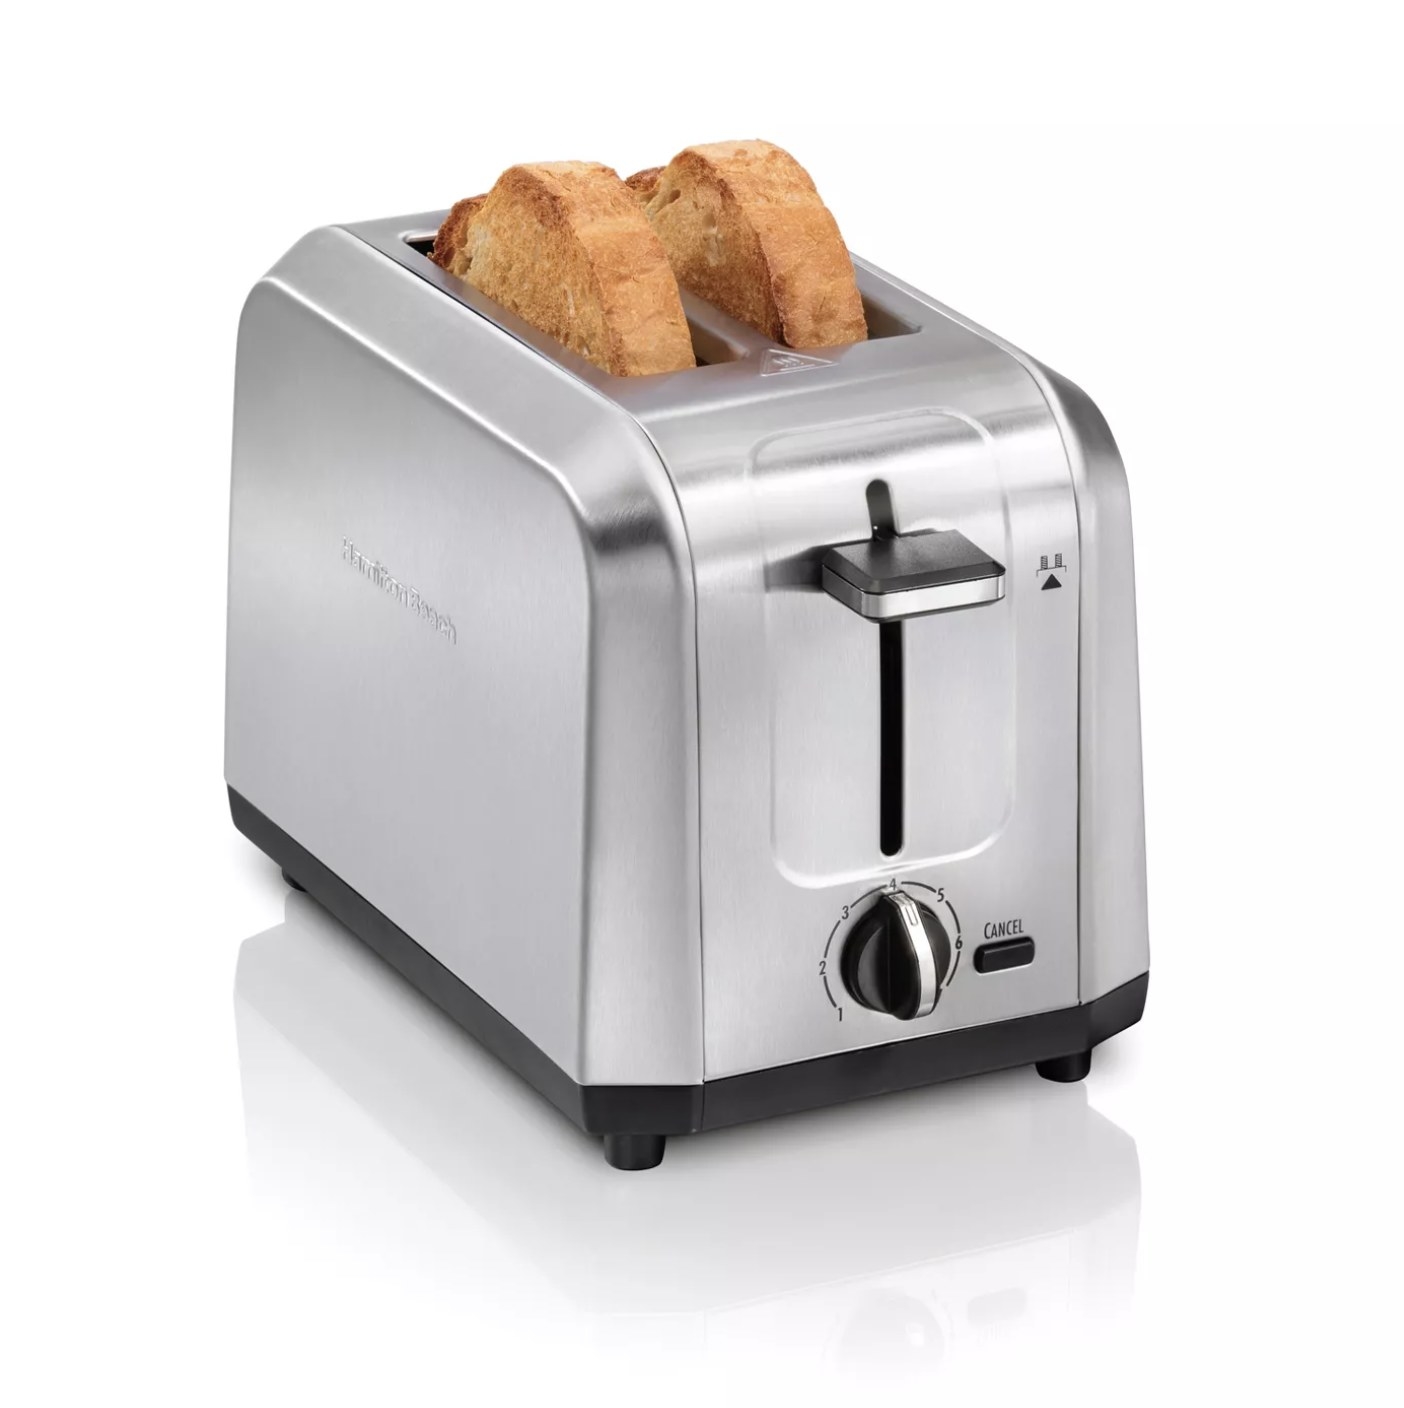 The silver toaster with toast in the slots